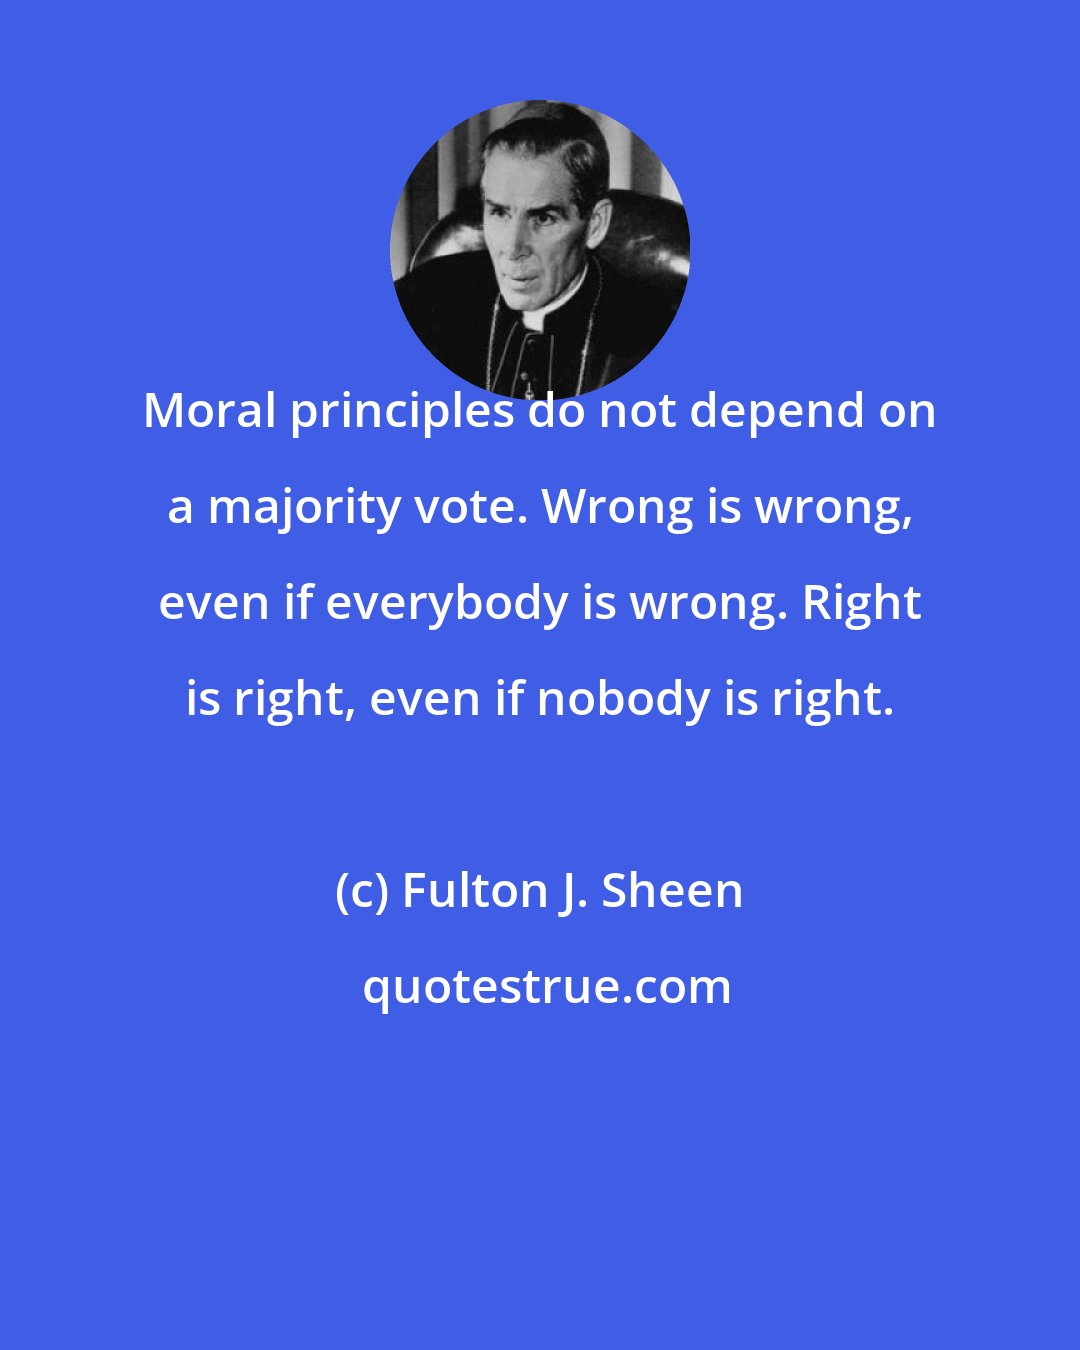 Fulton J. Sheen: Moral principles do not depend on a majority vote. Wrong is wrong, even if everybody is wrong. Right is right, even if nobody is right.